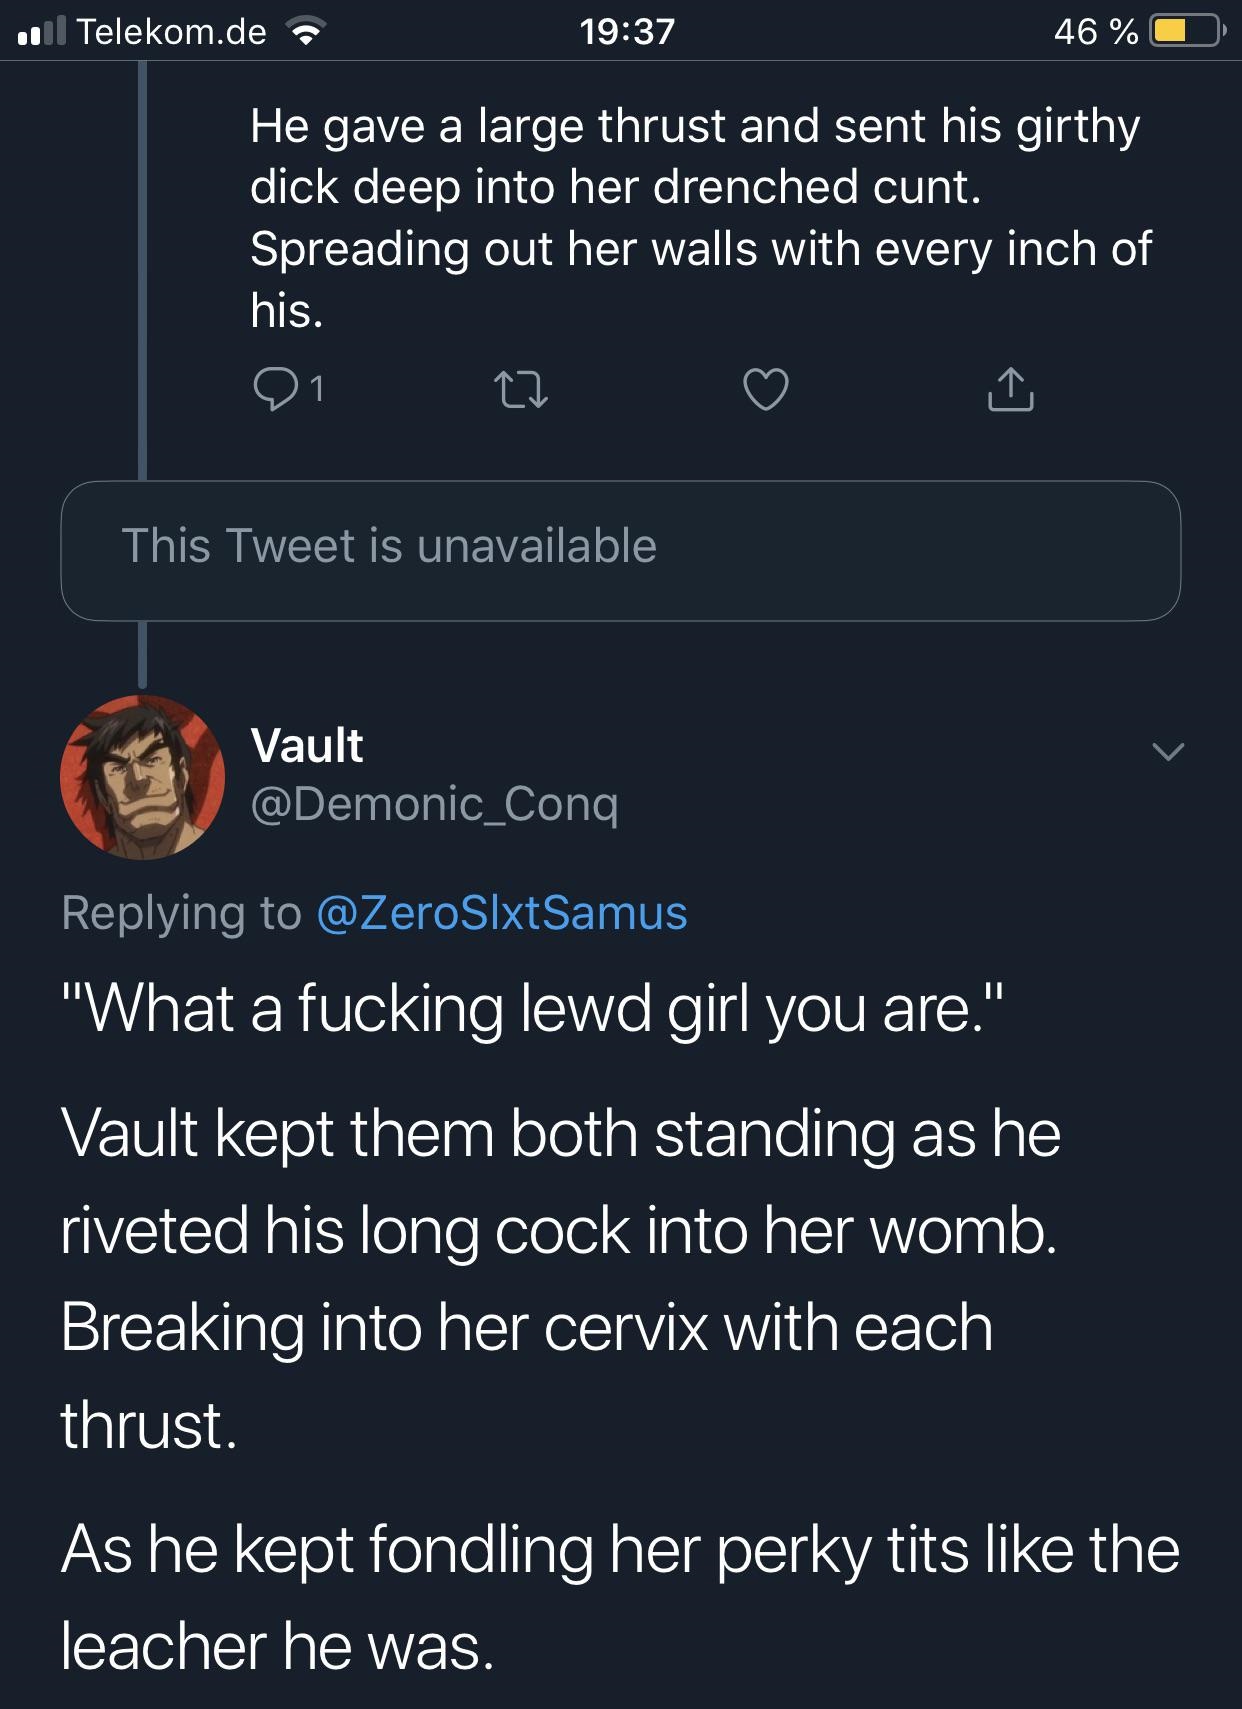 screenshot - ... Telekom.de 46% 0 He gave a large thrust and sent his girthy dick deep into her drenched cunt. Spreading out her walls with every inch of his. 21 22 This Tweet is unavailable Vault Vault "What a fucking lewd girl you are." Vault kept them 